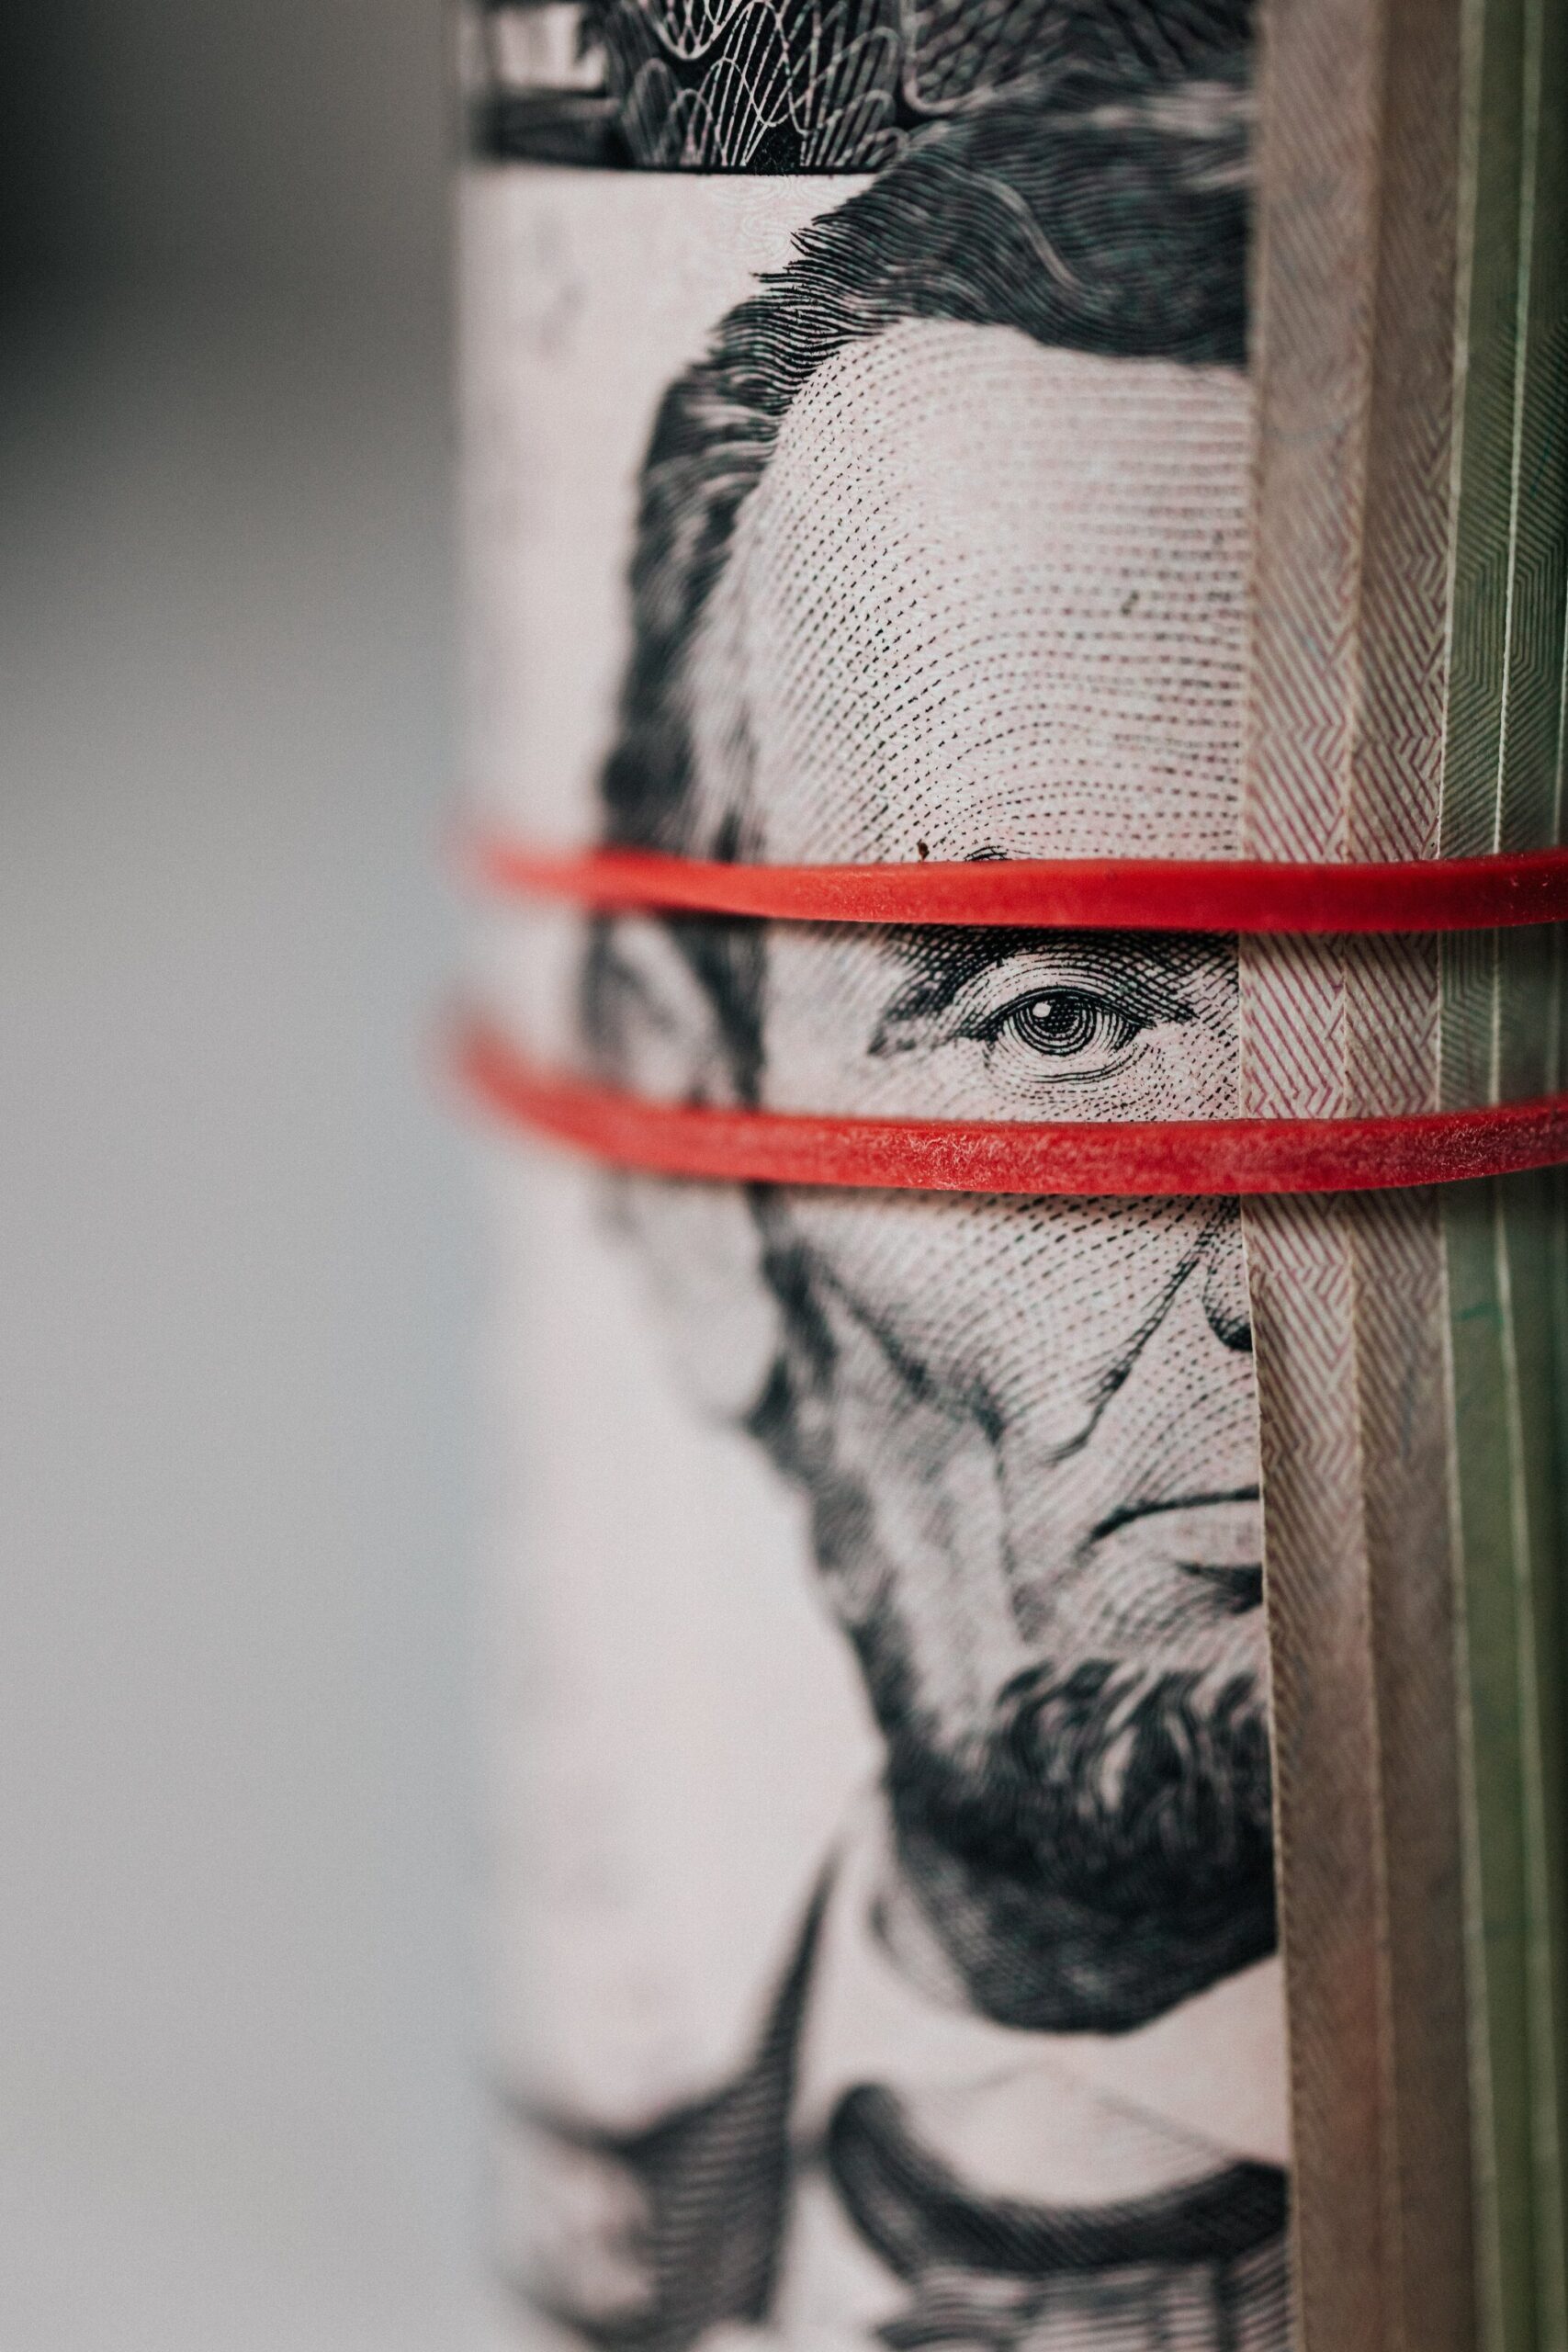 A 5 dollar bill strapped with a rubber band, showing Abraham Lincoln's face. Depicting Greed